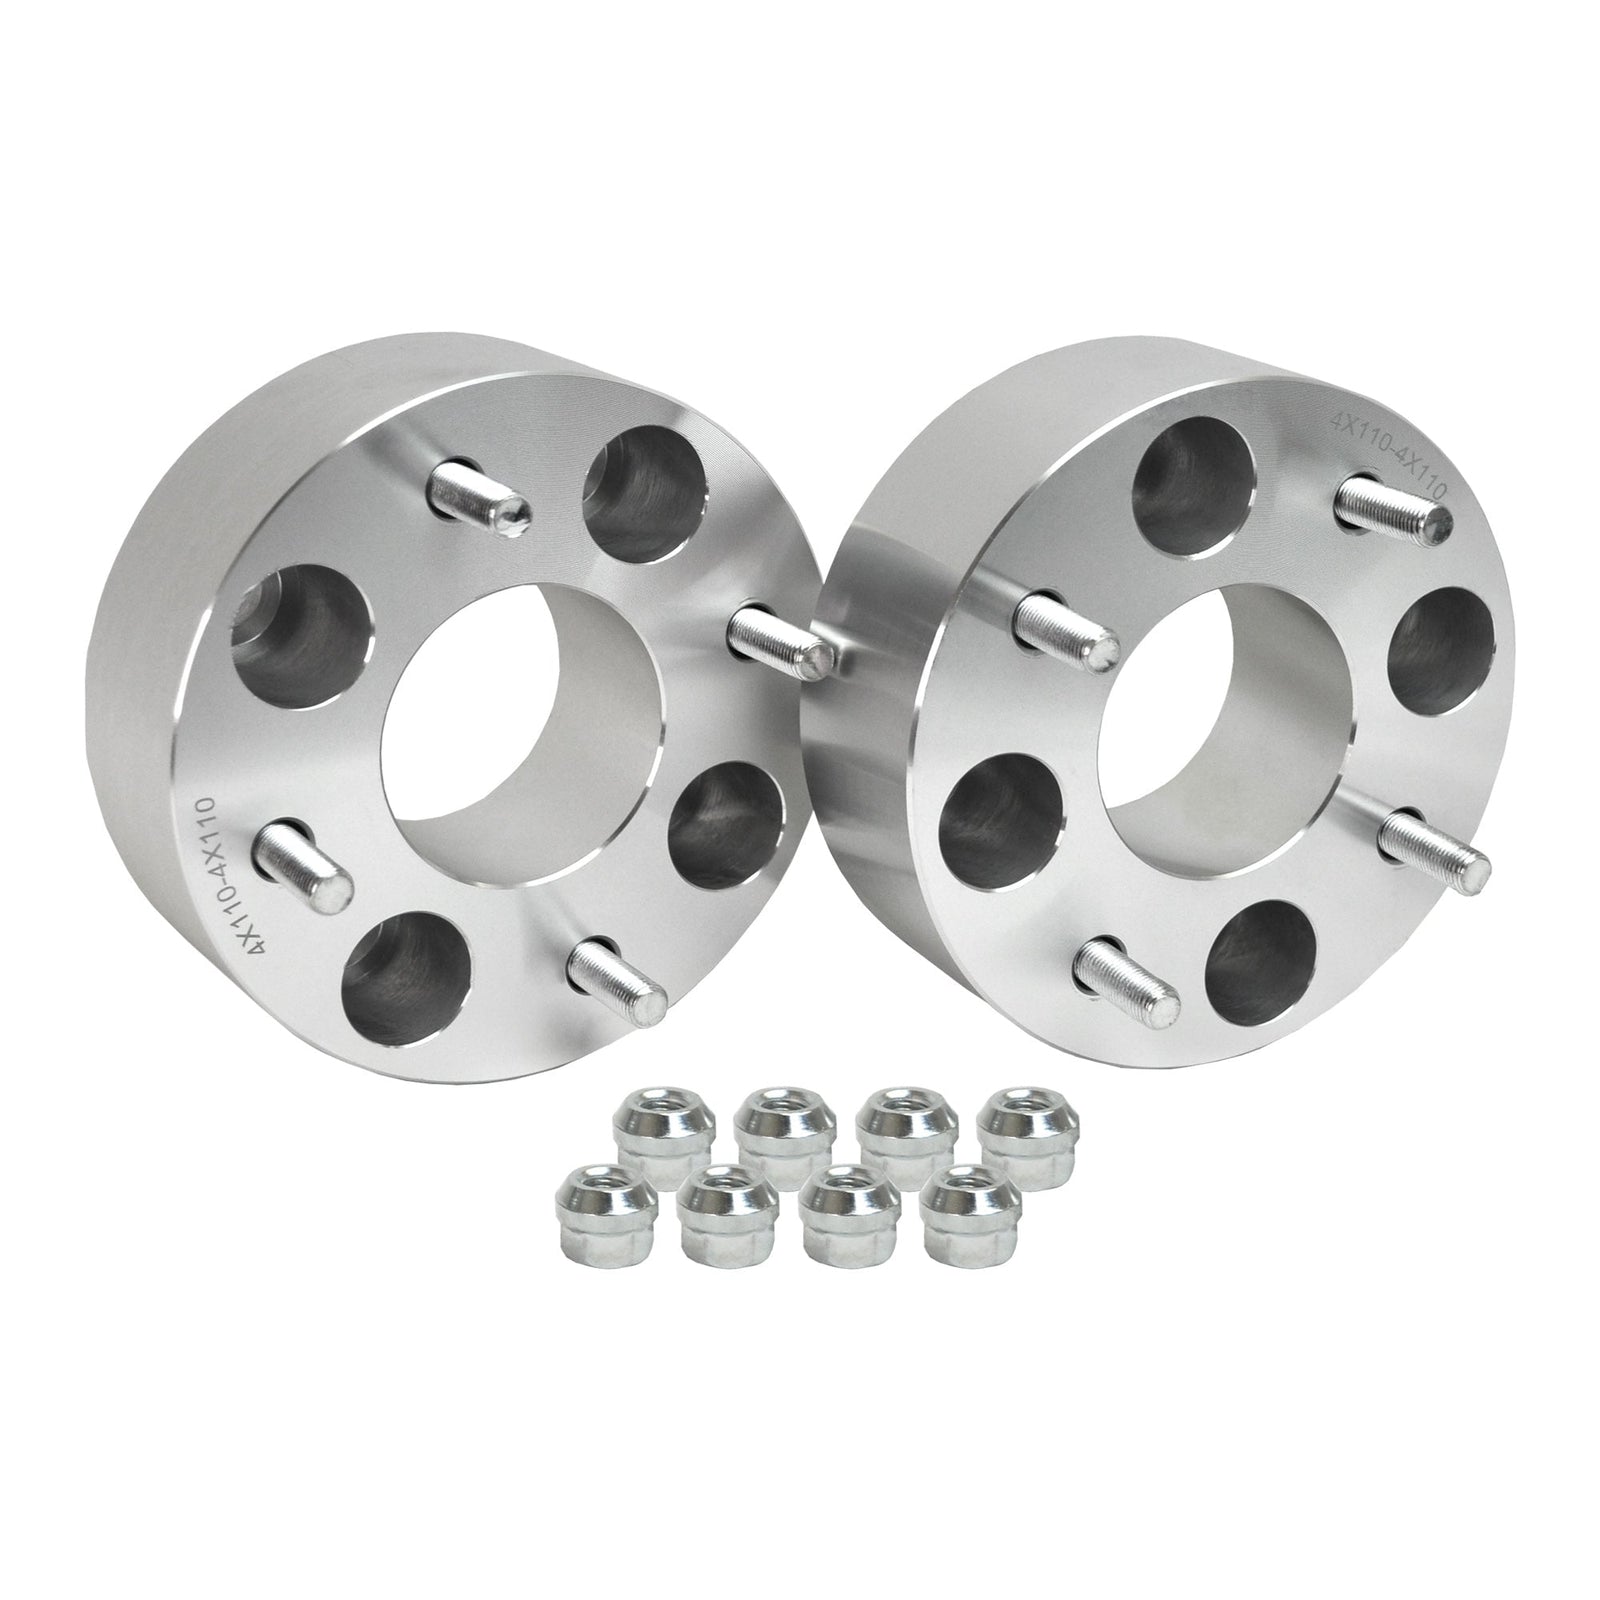 Bombardier Outlander 800 Max Rugged Wheel Spacer